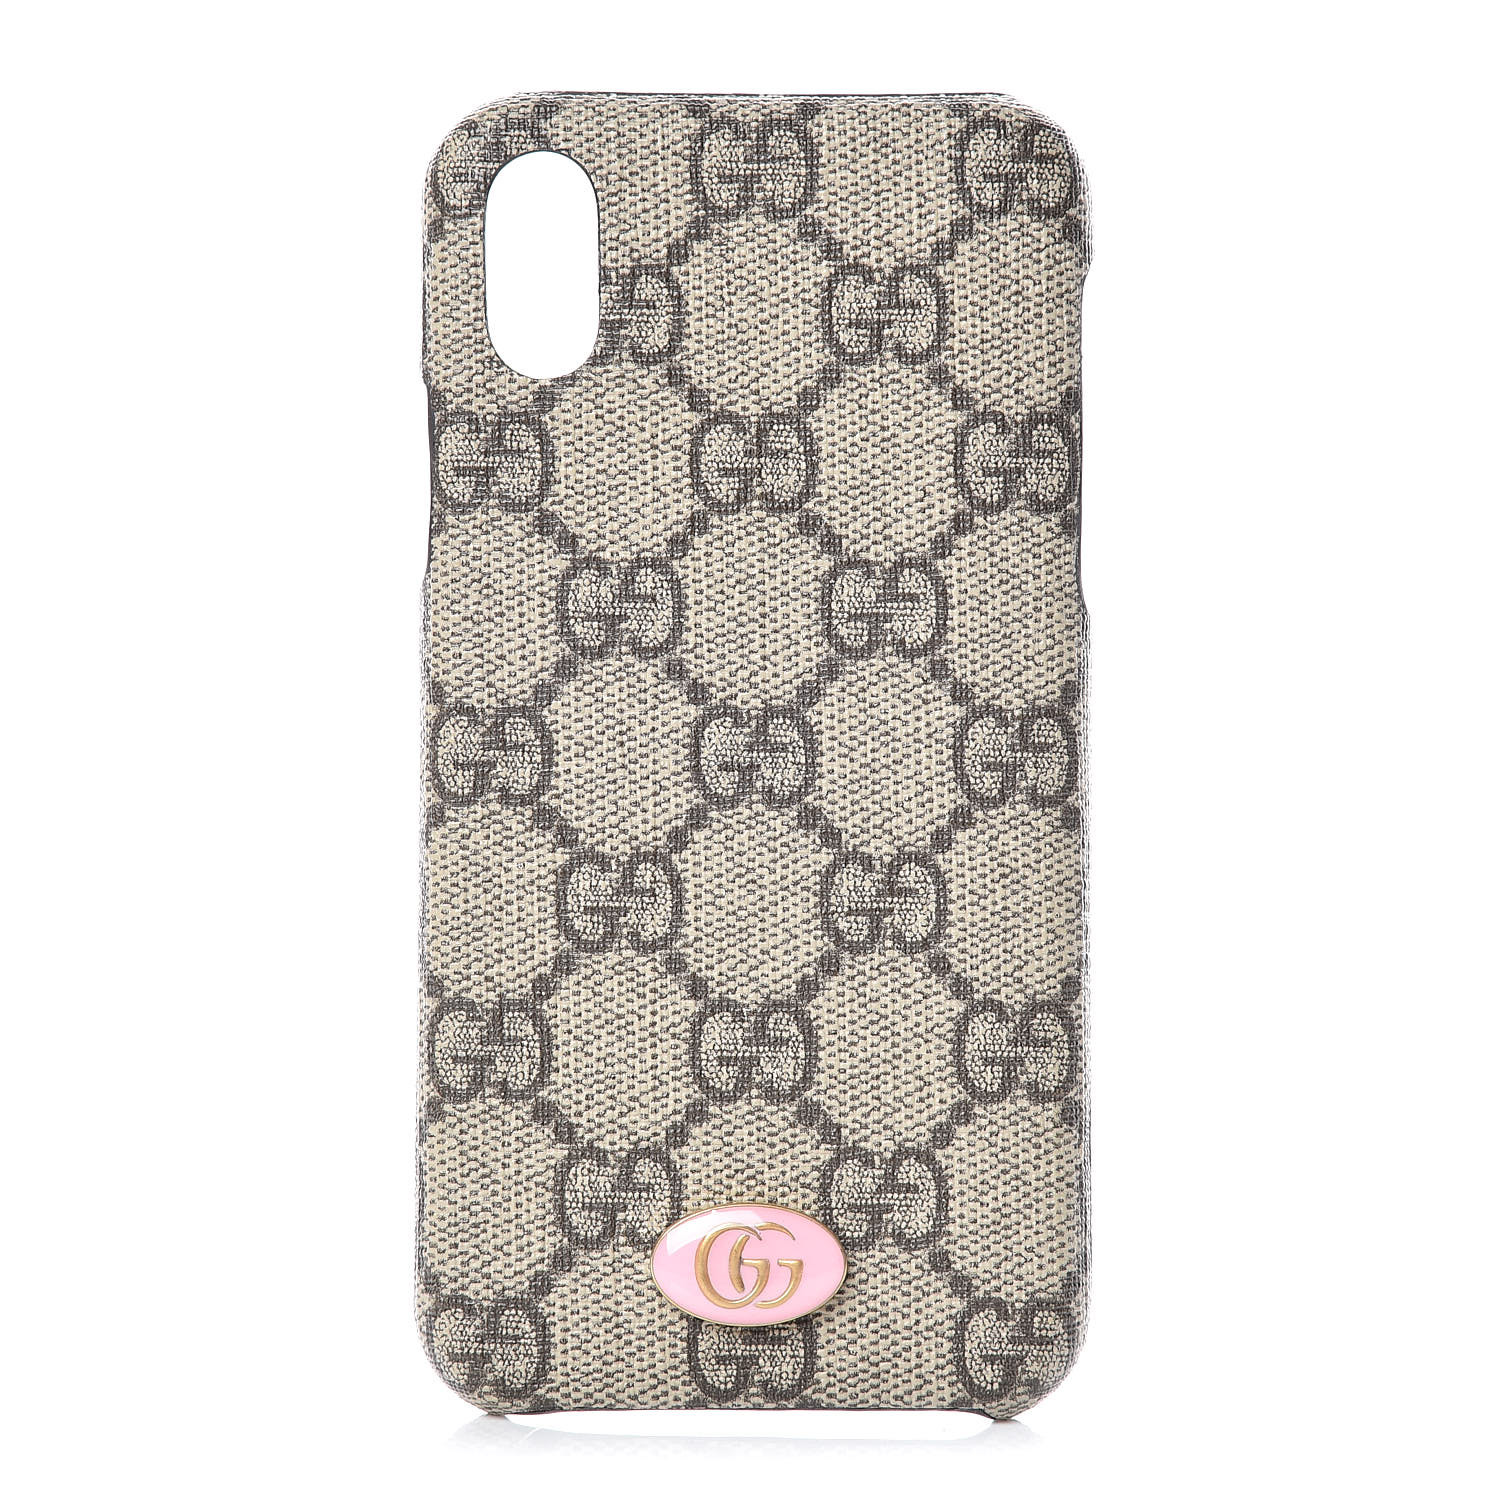 real gucci iphone case